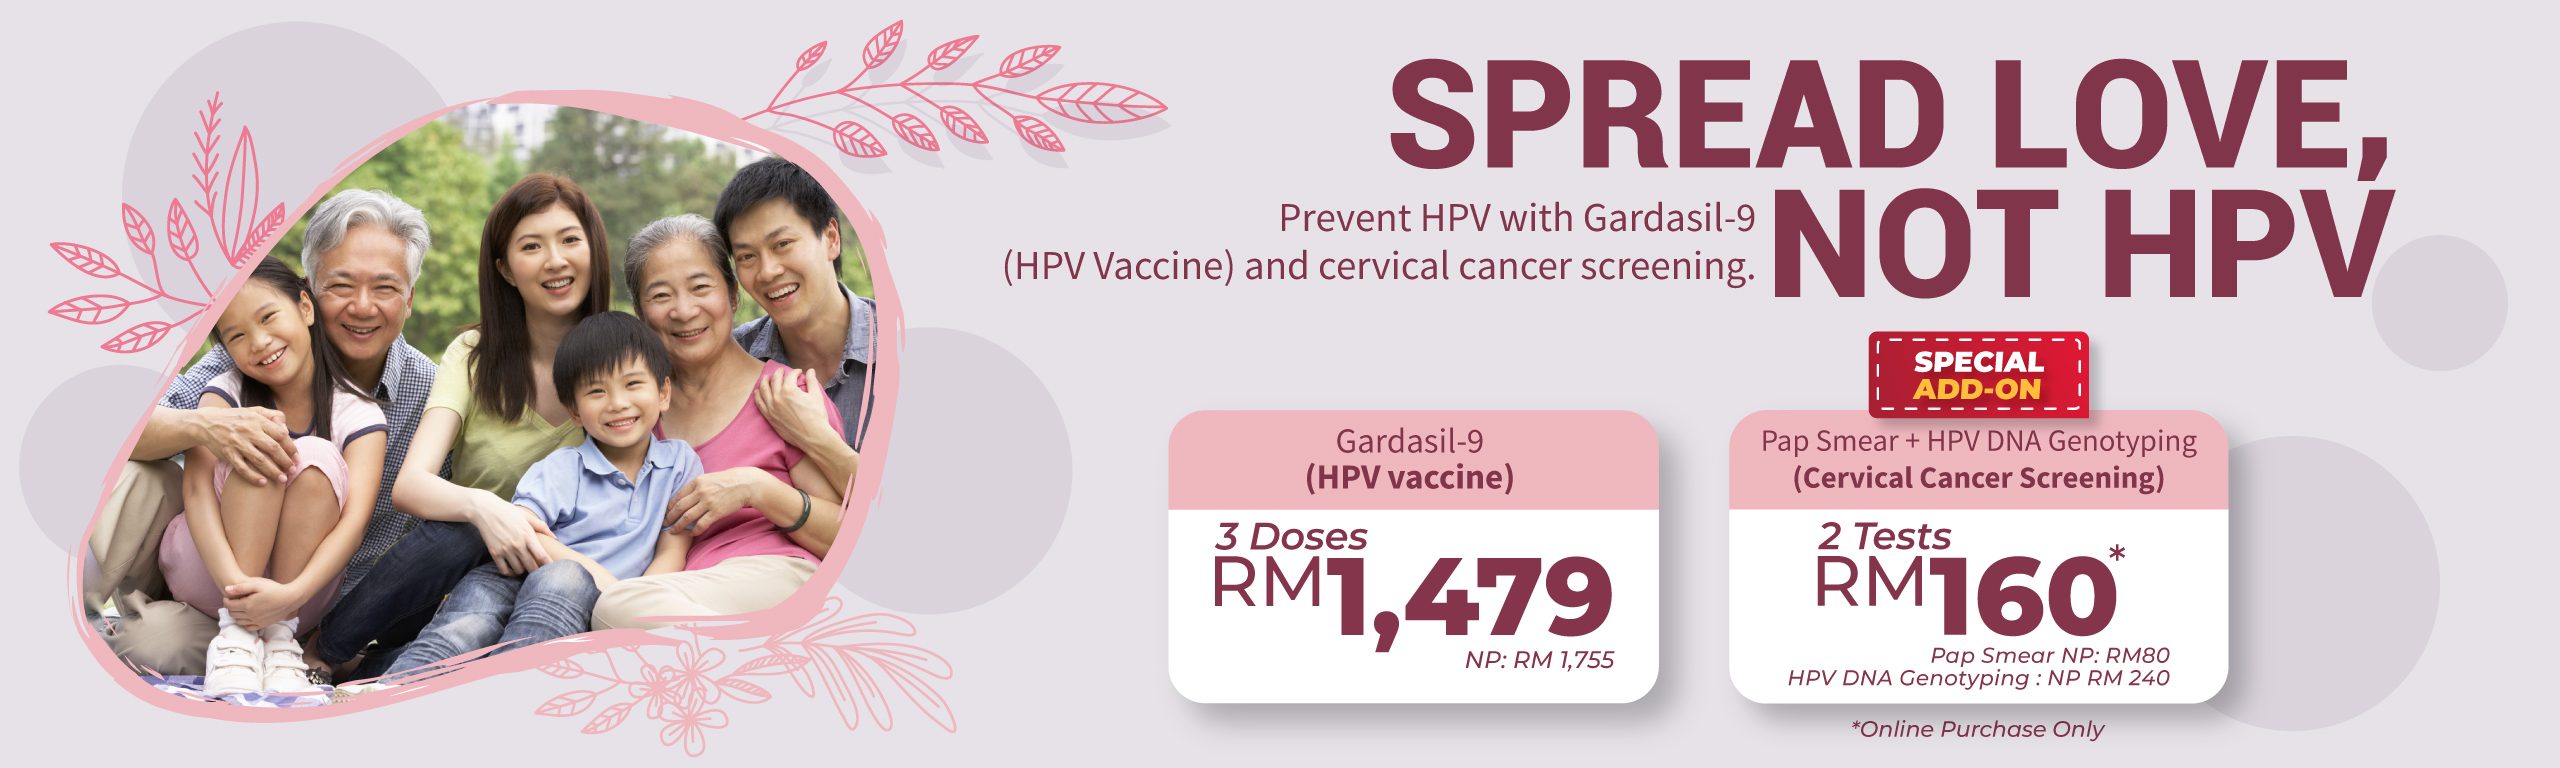 Spread-Love-Not-HPV-Web-Banner-(Landing-Page)-FA